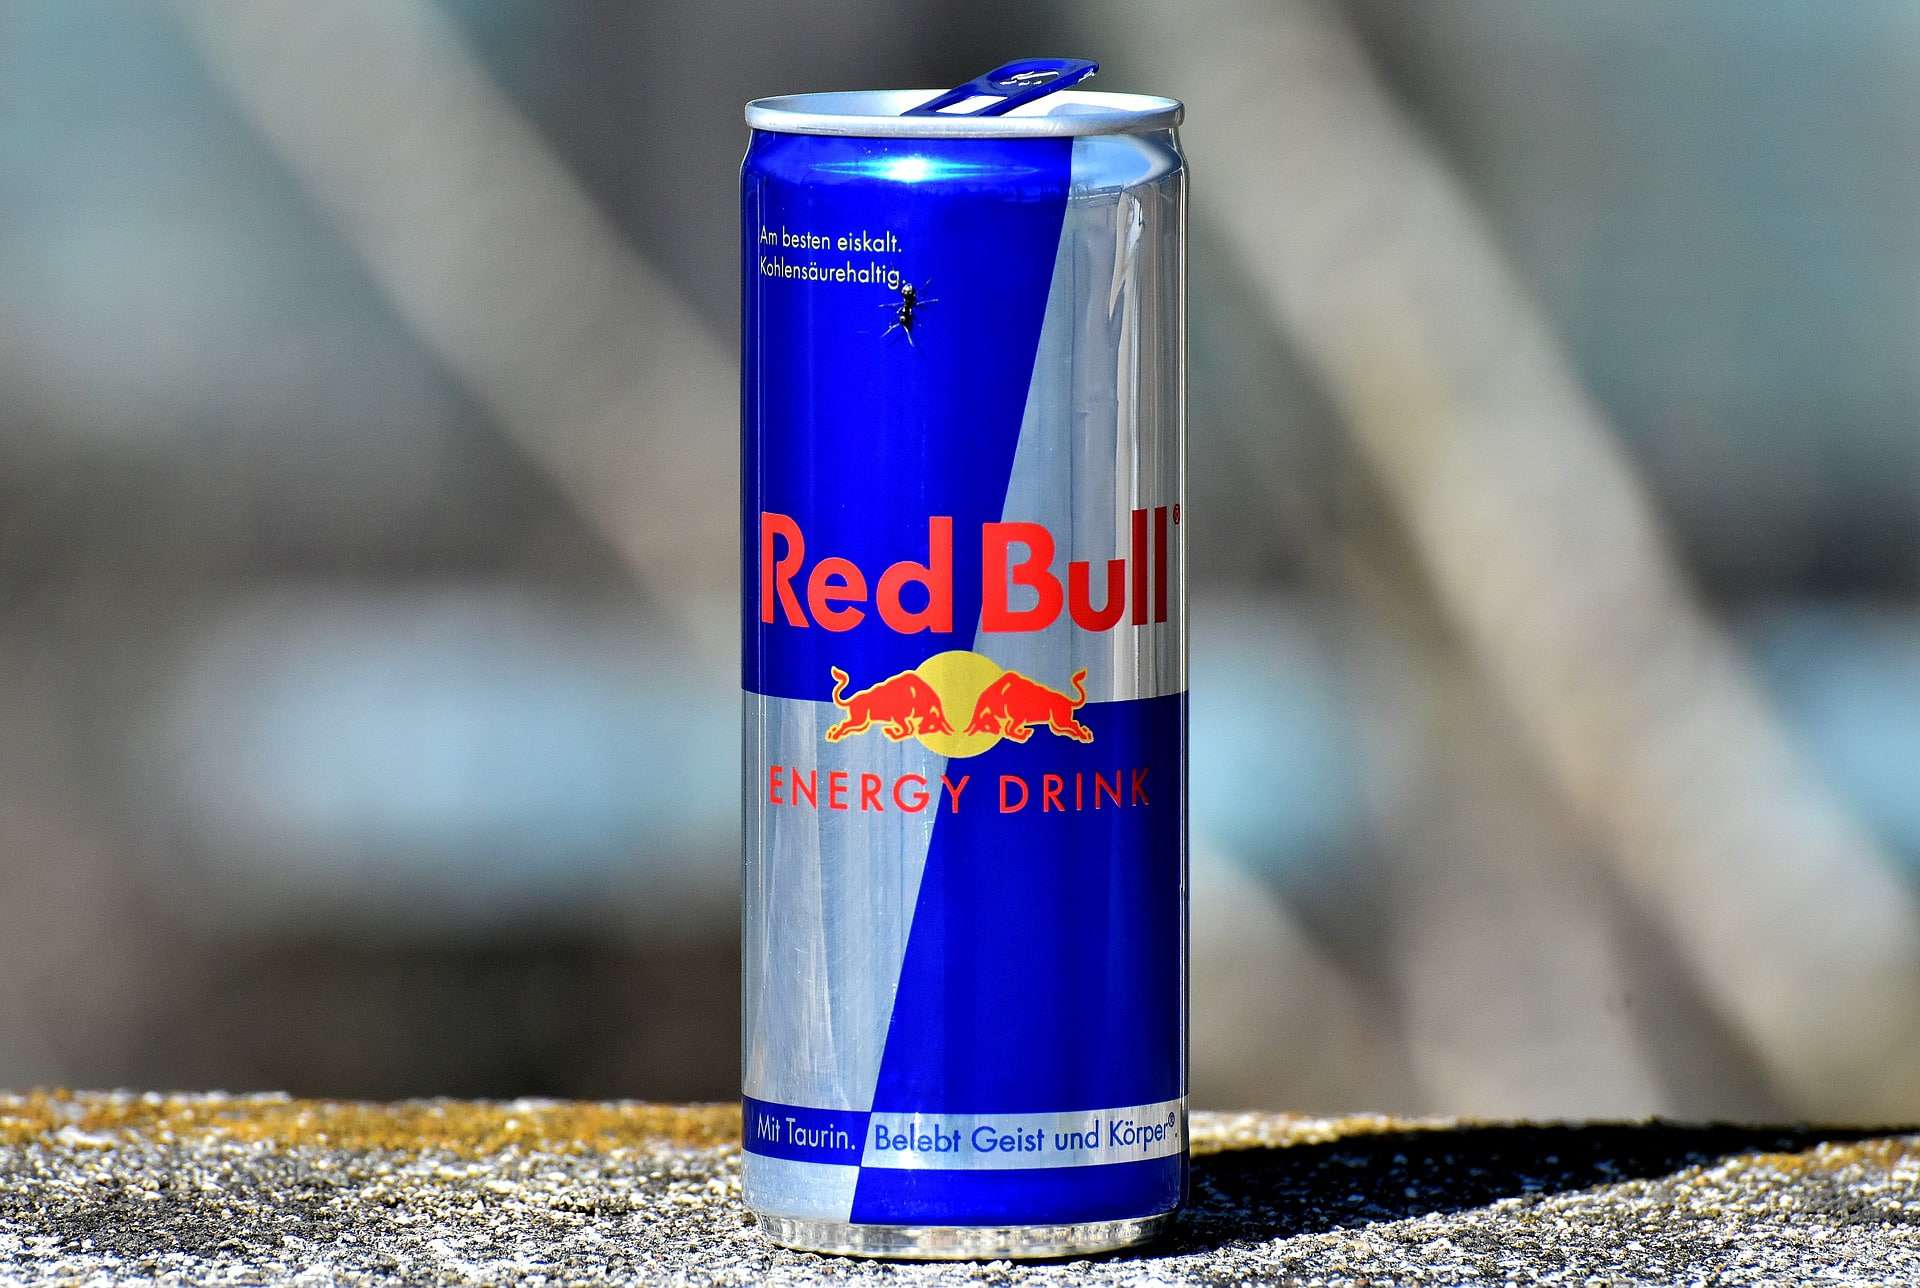 Does Red Bull have more caffeine than coffee